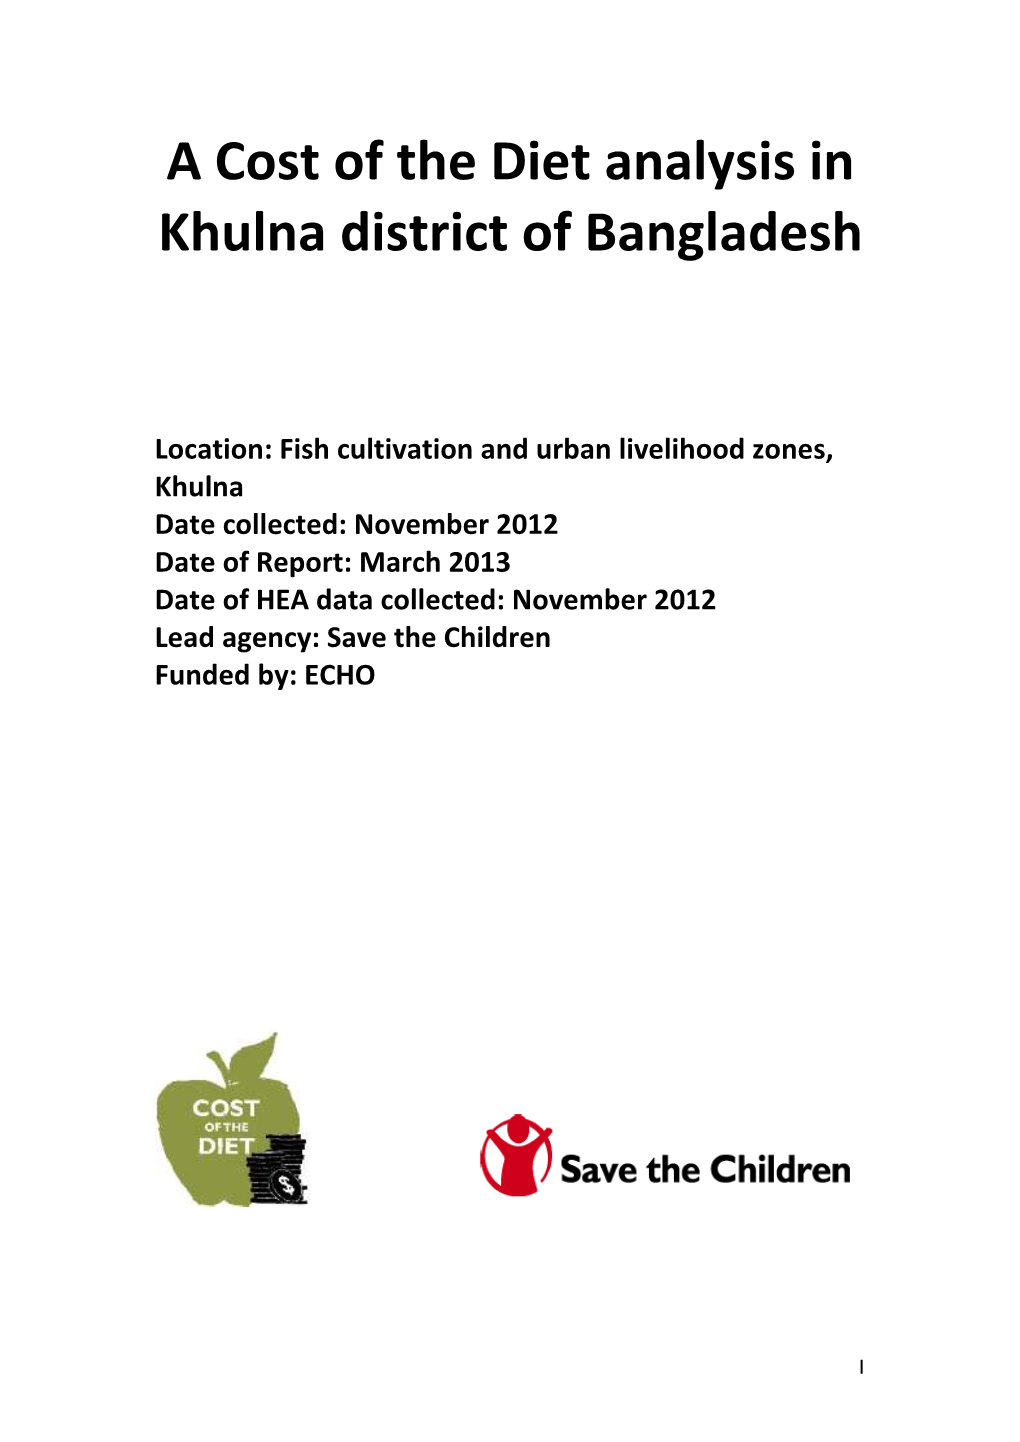 A Cost of the Diet Analysis in Khulna District of Bangladesh